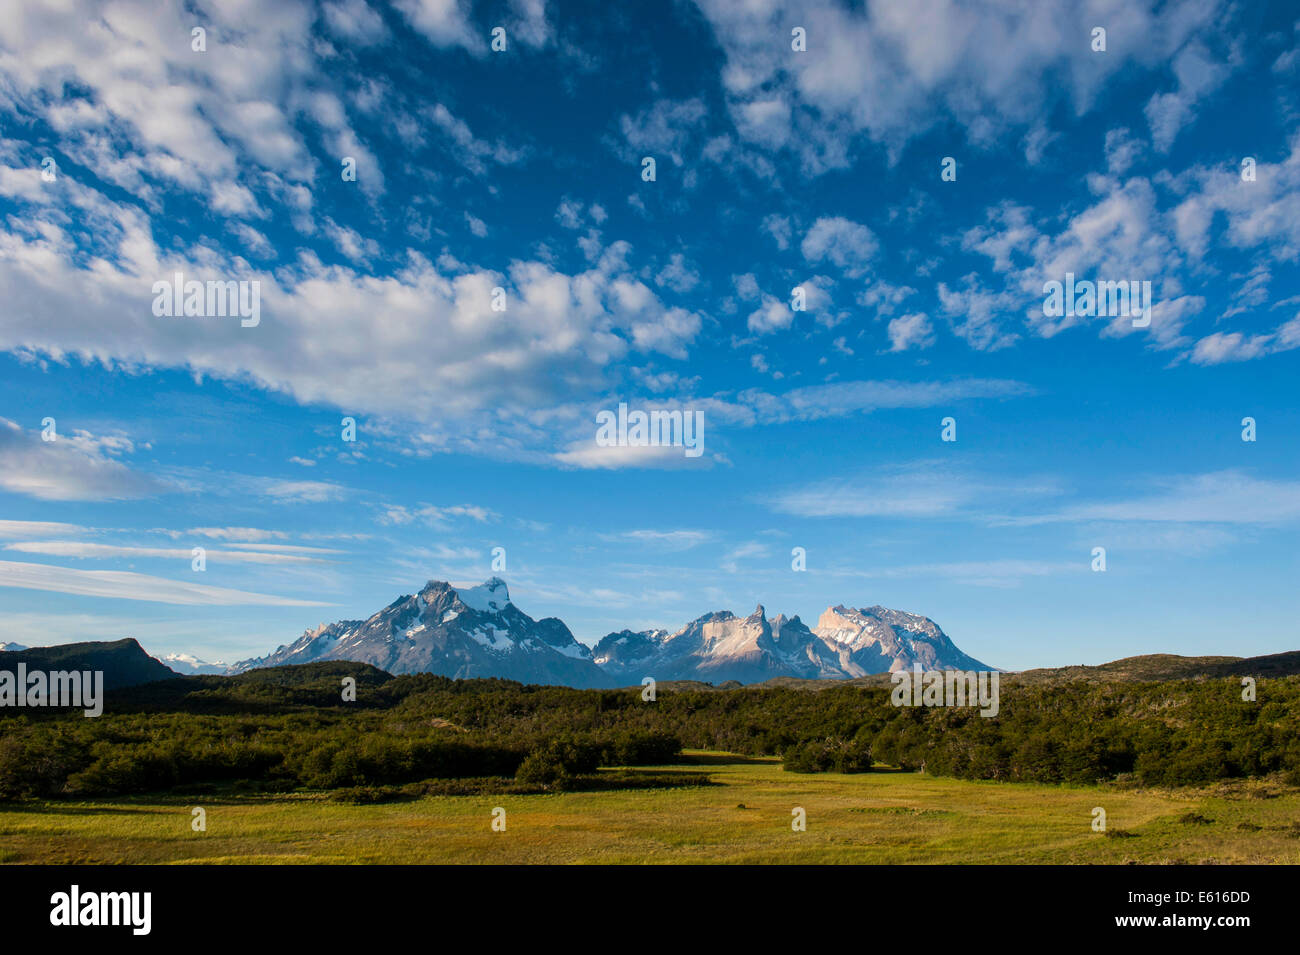 Landscape in Torres del Paine National Park, Patagonia, Chile Stock Photo